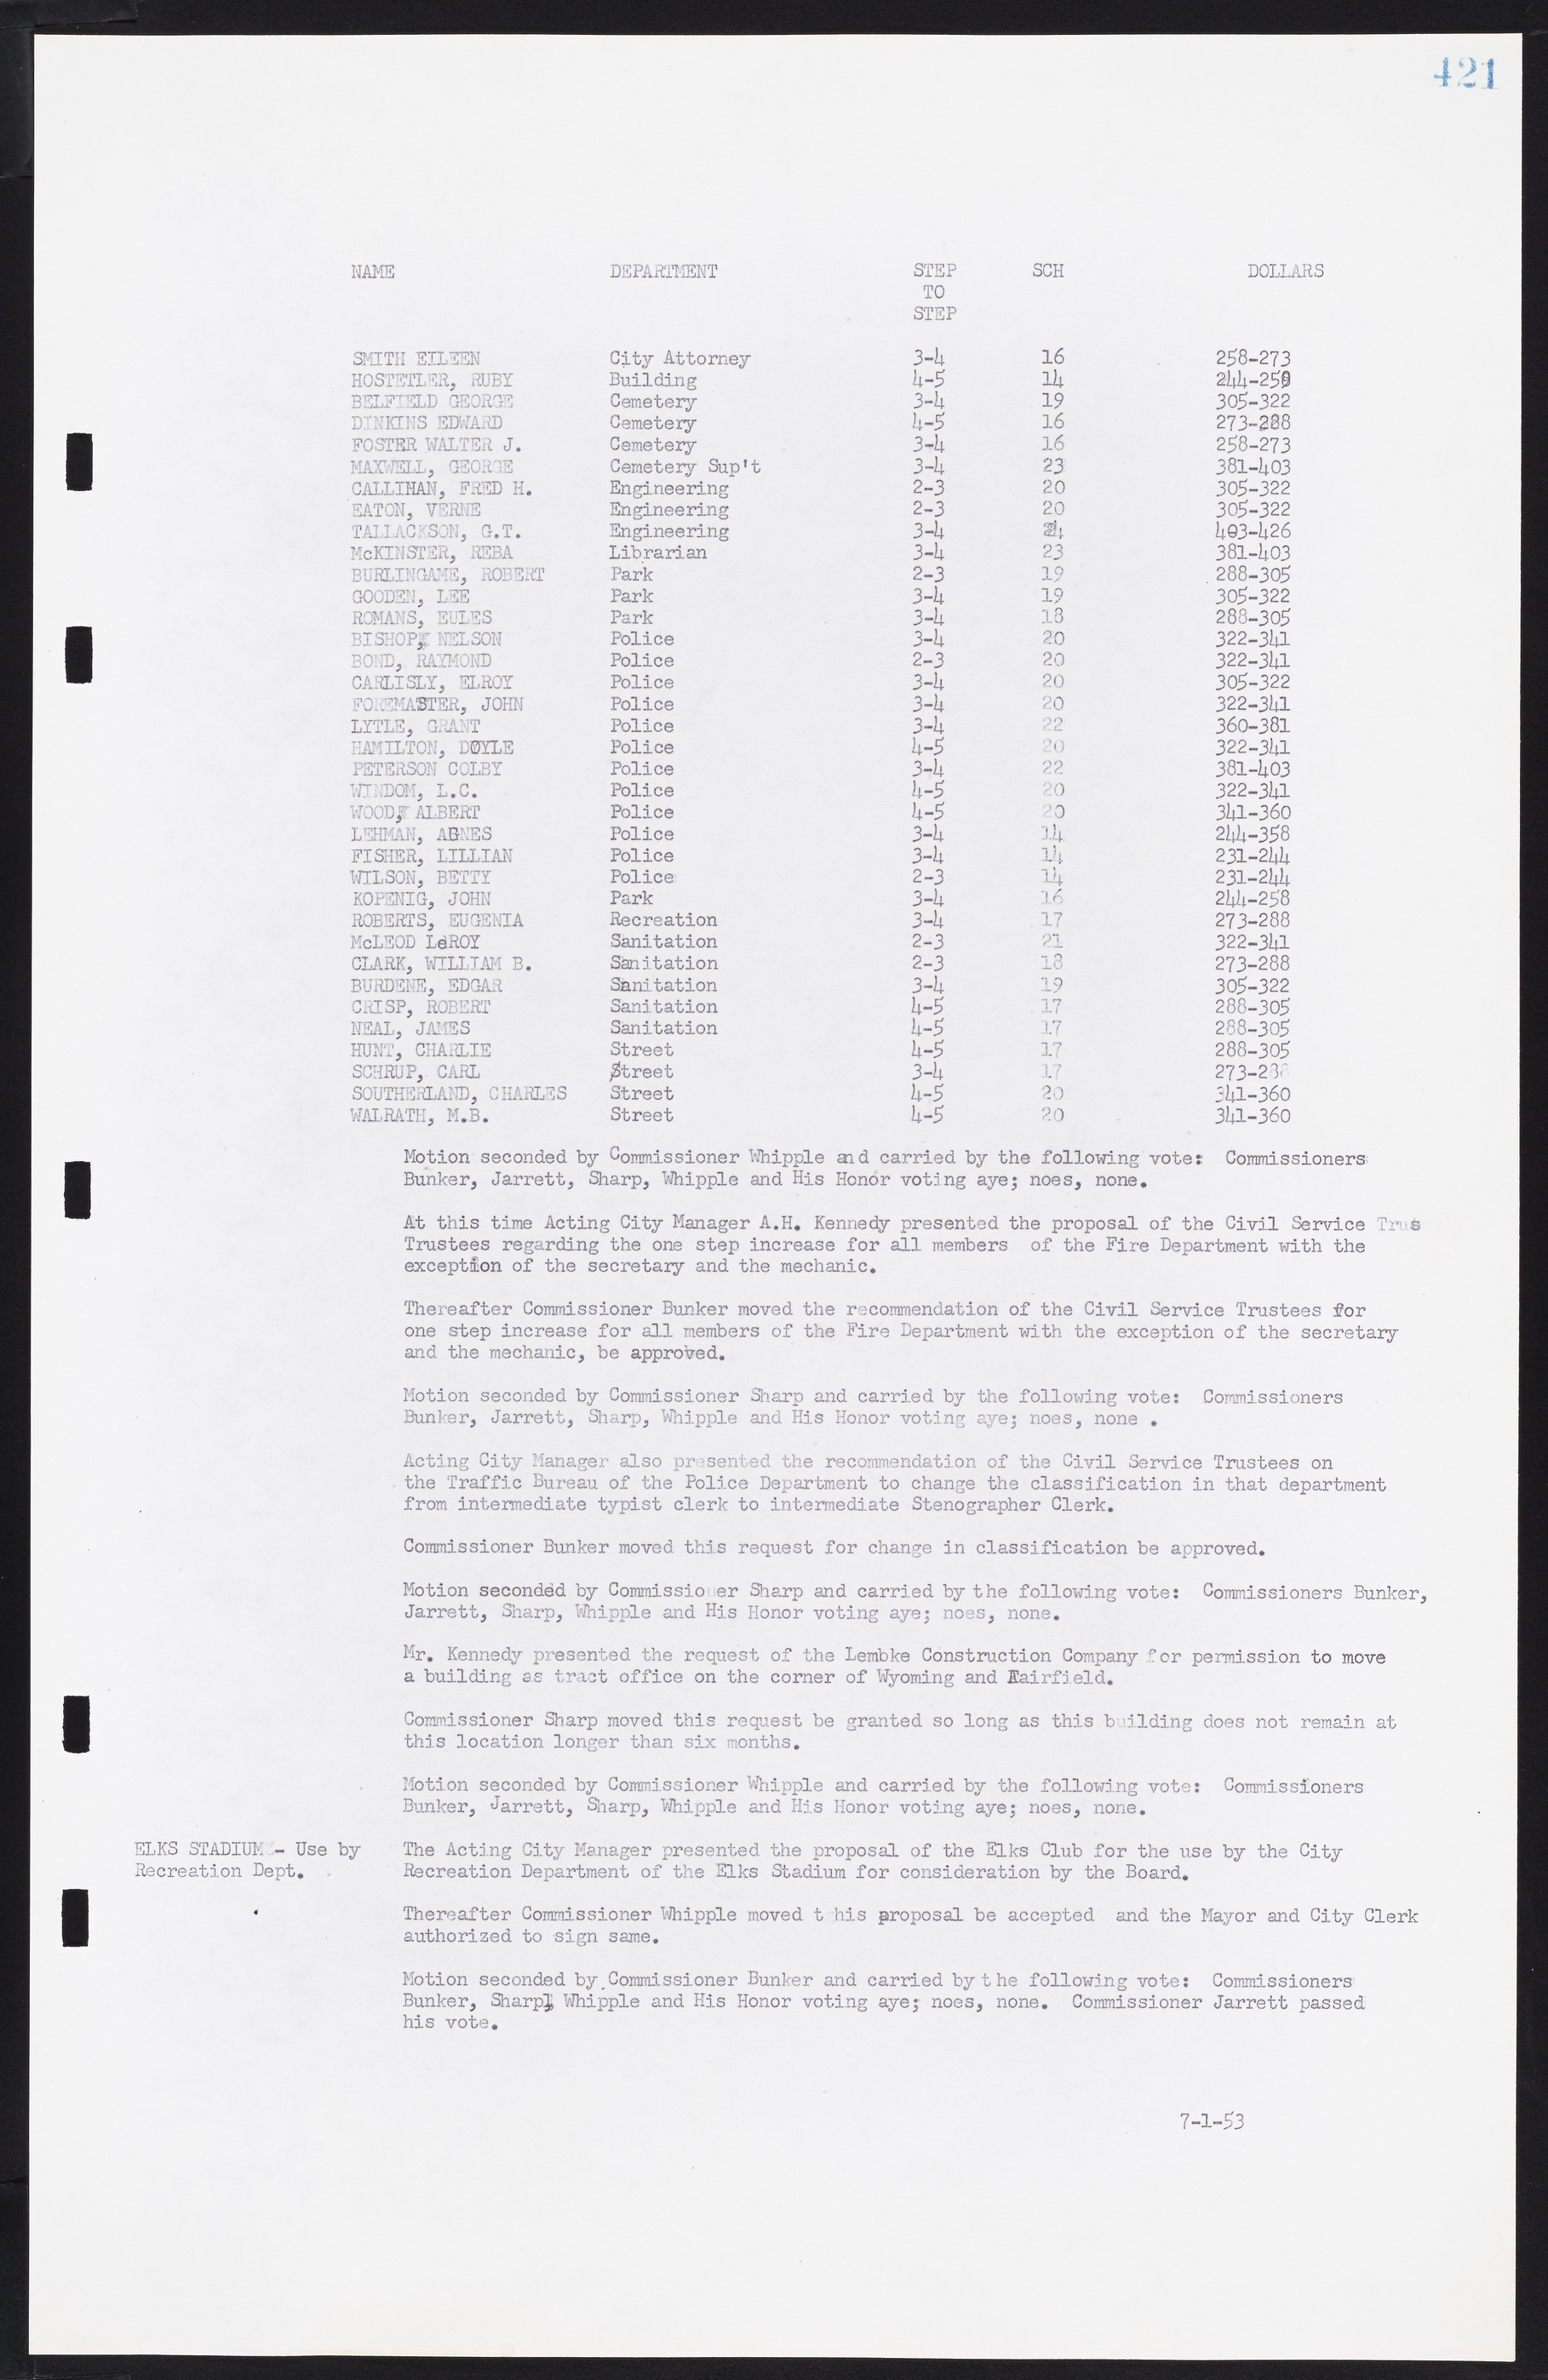 Las Vegas City Commission Minutes, May 26, 1952 to February 17, 1954, lvc000008-451